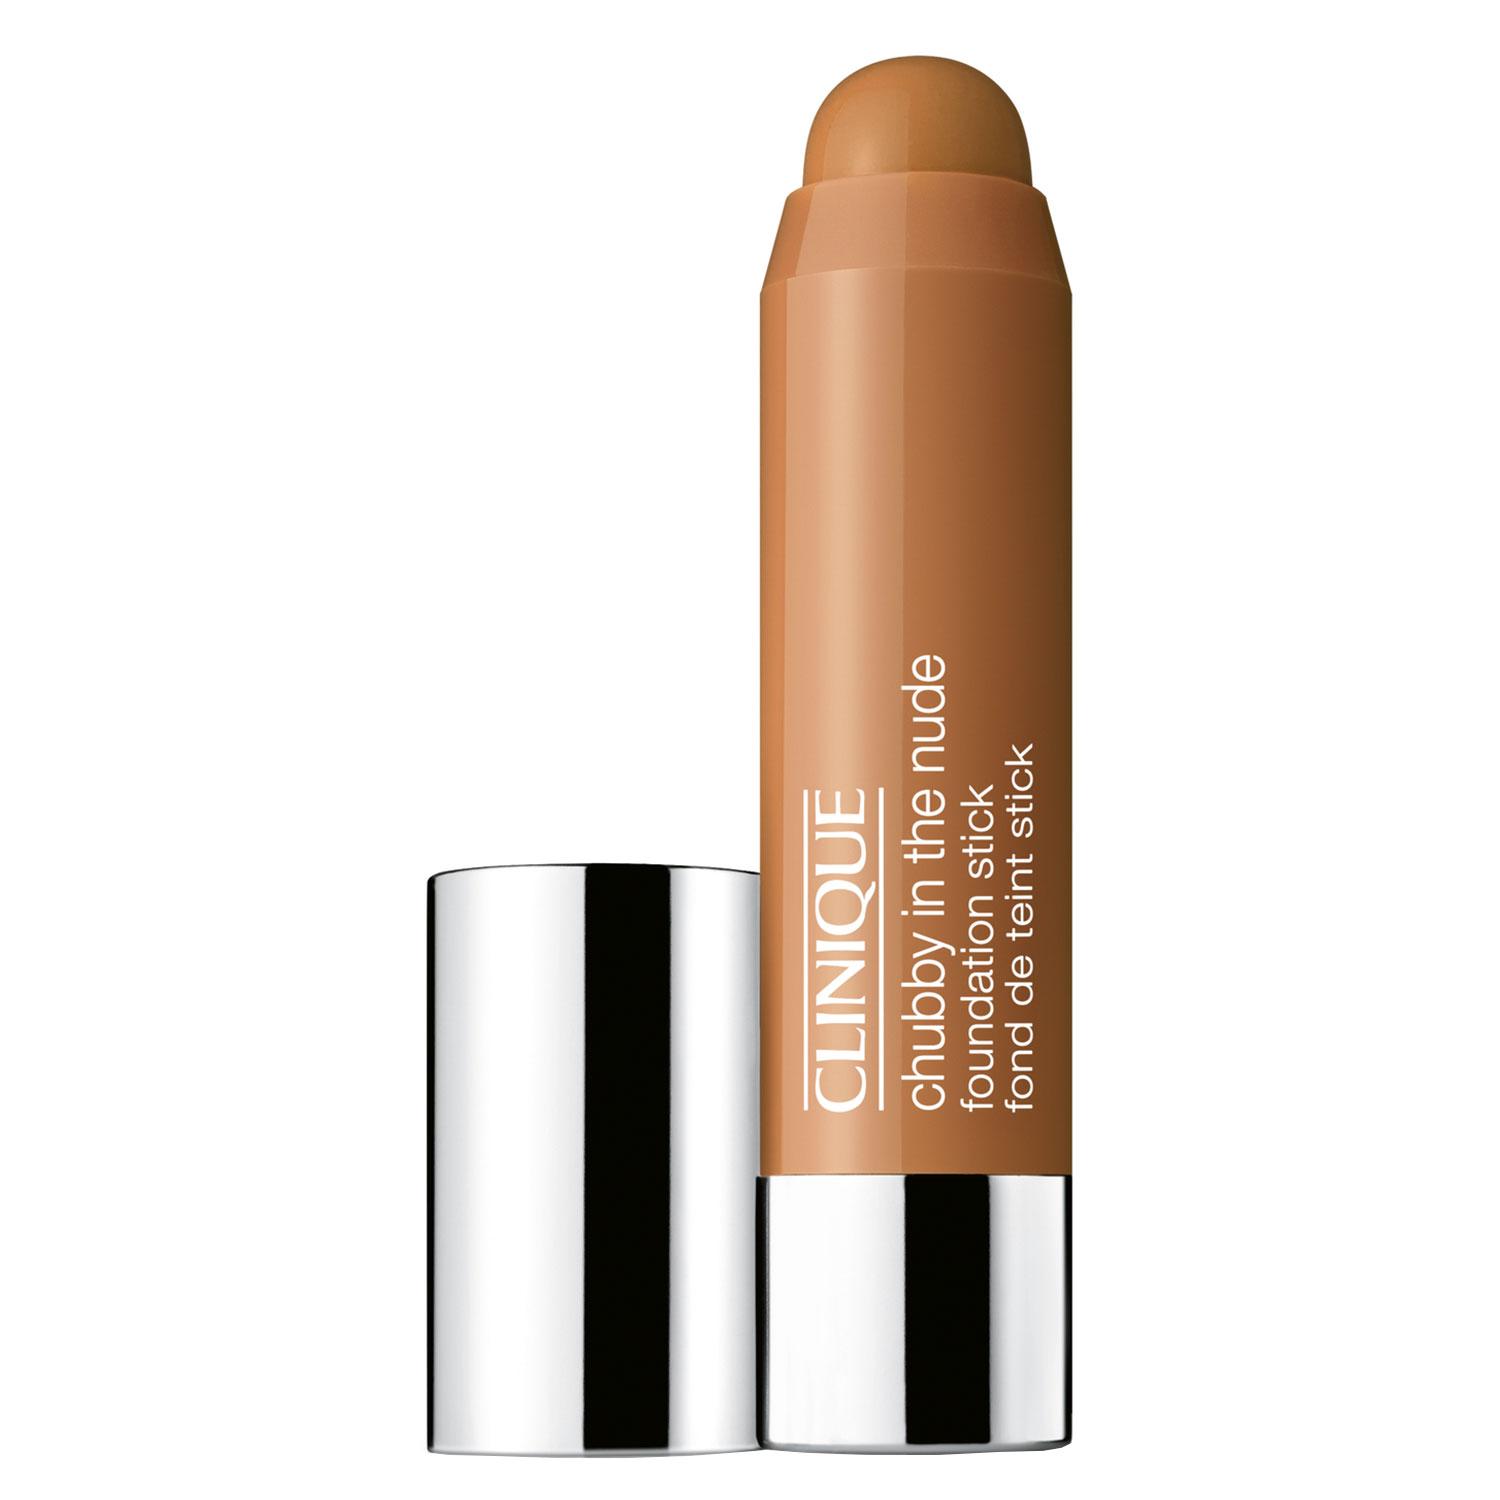 Chubby in the Nude Foundation Stick - Curvy Contour